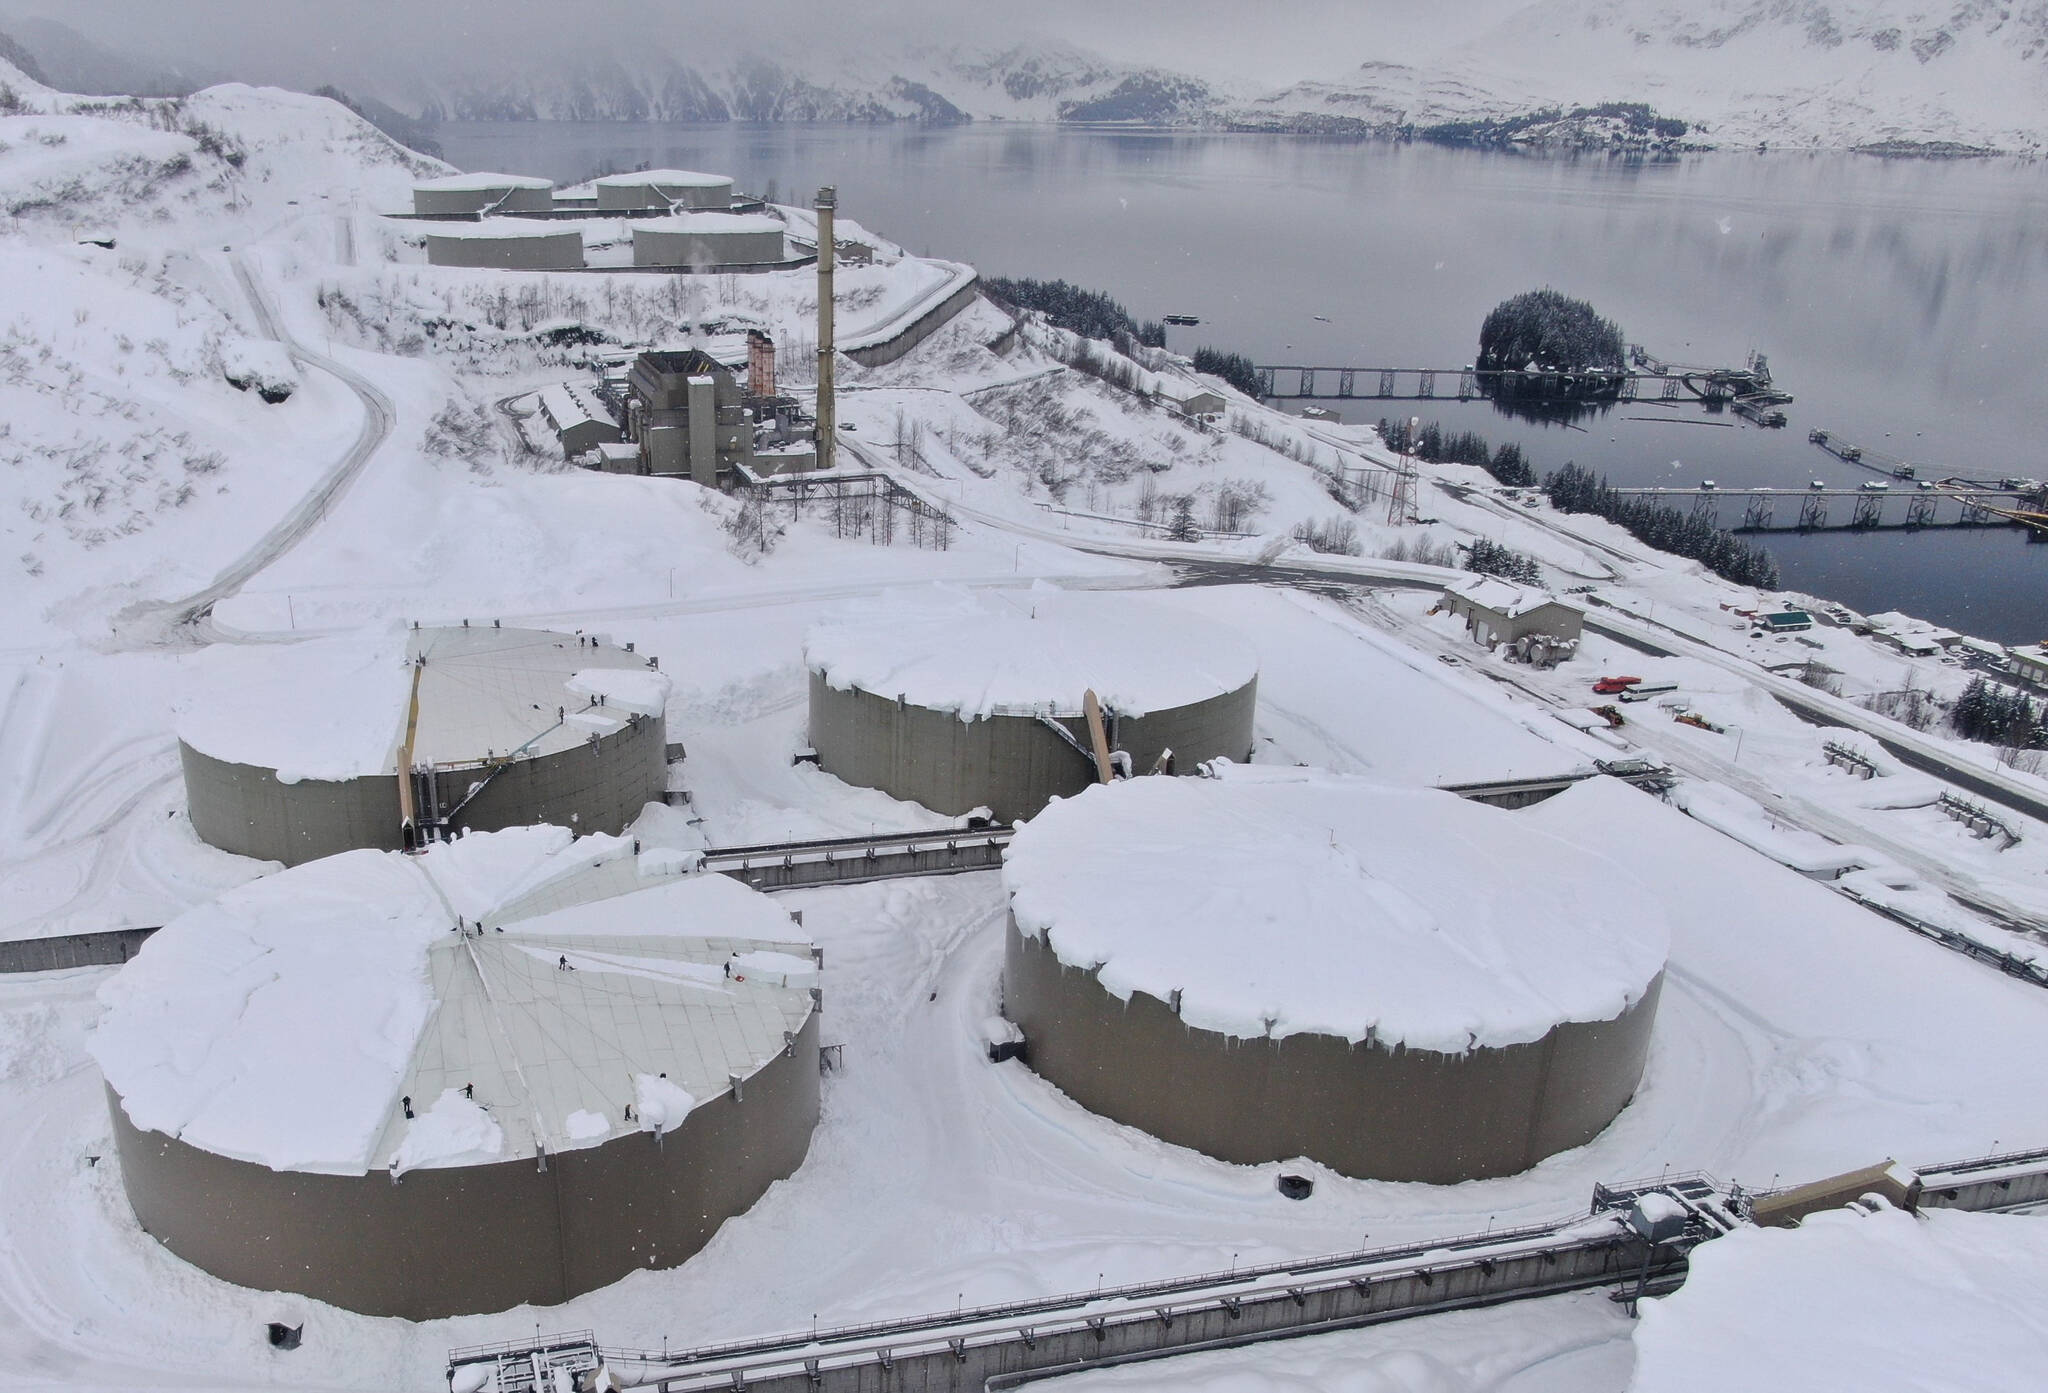 This March 16, 2022, drone photo provided by Alyeska Pipeline Co. shows snow covering 62-foot tall and acre-wide oil tanks at the Valdez Marine Terminal in Valdez, Alaska. Workers at the endpoint of the trans-Alaska oil pipeline are using saws to cut up large blocks of hard-packed snow on top of the oil storage tanks so they can shove the chunks off the tanks, some of which have damaged infrastructure after more than 4 feet of snow fell in Valdez in a month. (Alyeska Pipeline Service Company via AP)